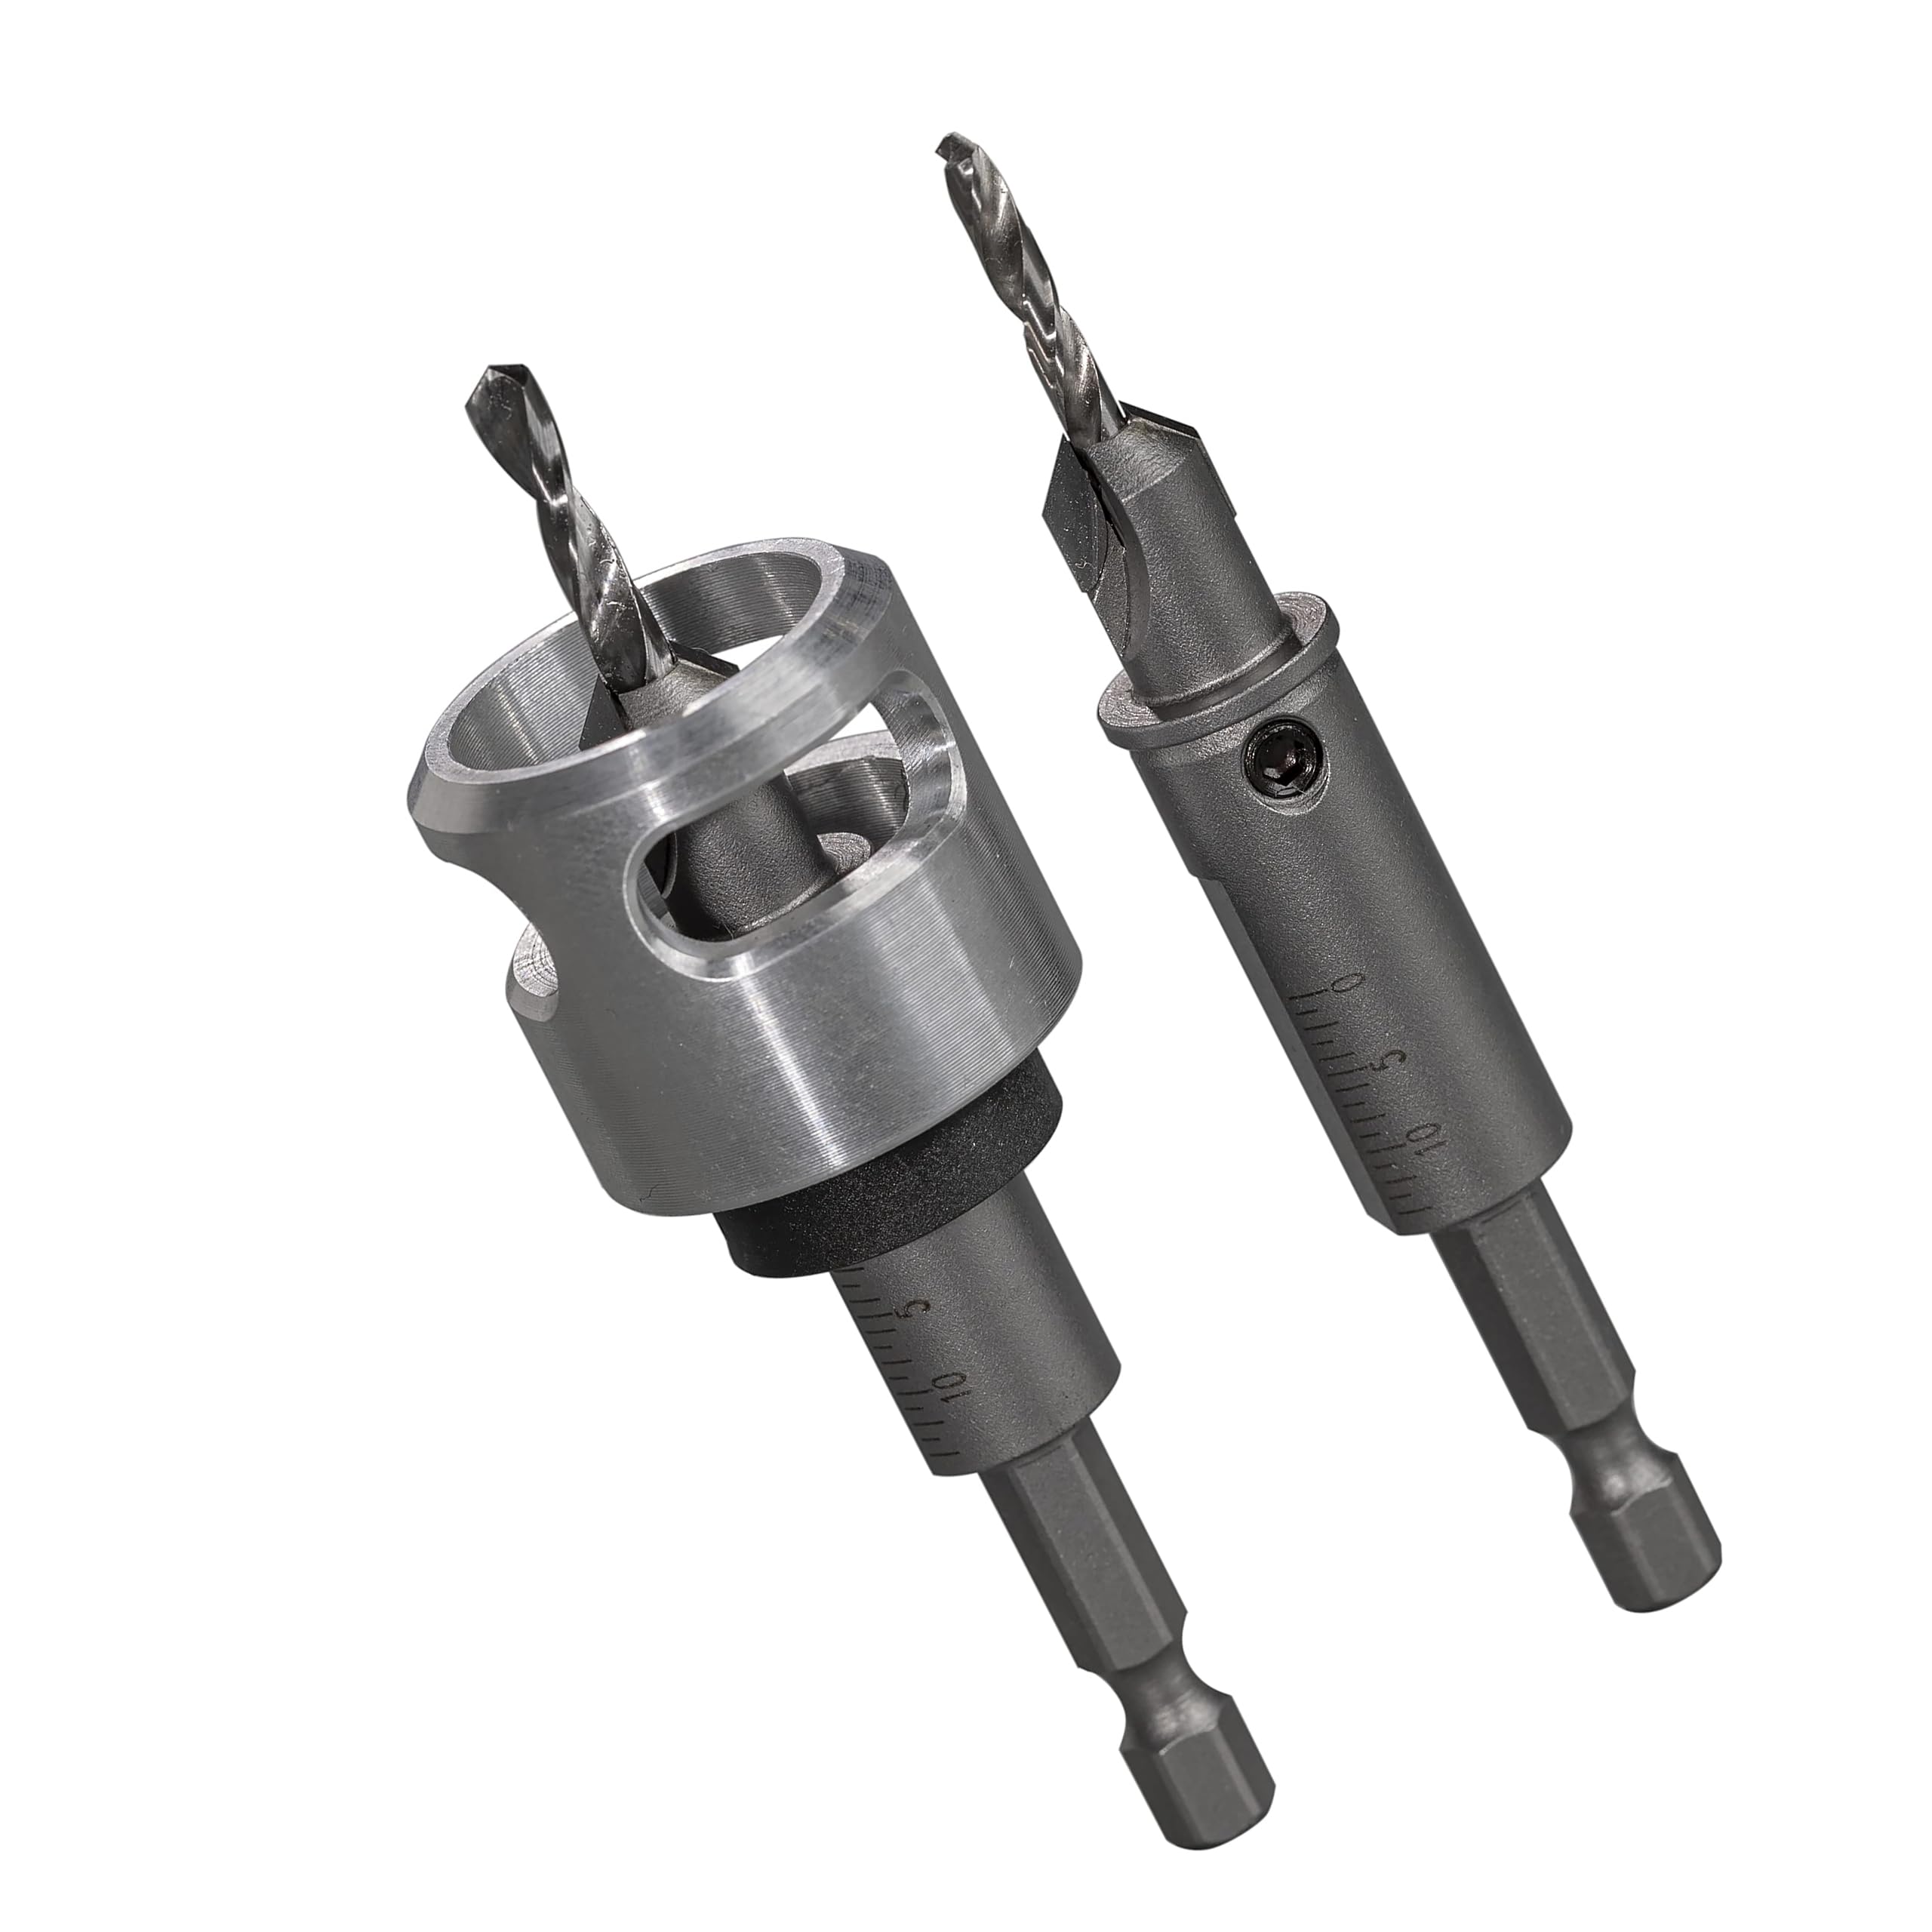 BETOP Industrial Tools-4pc Set Carbide Tipped 82-Deg Countersink bit with Drilling Depth Stop